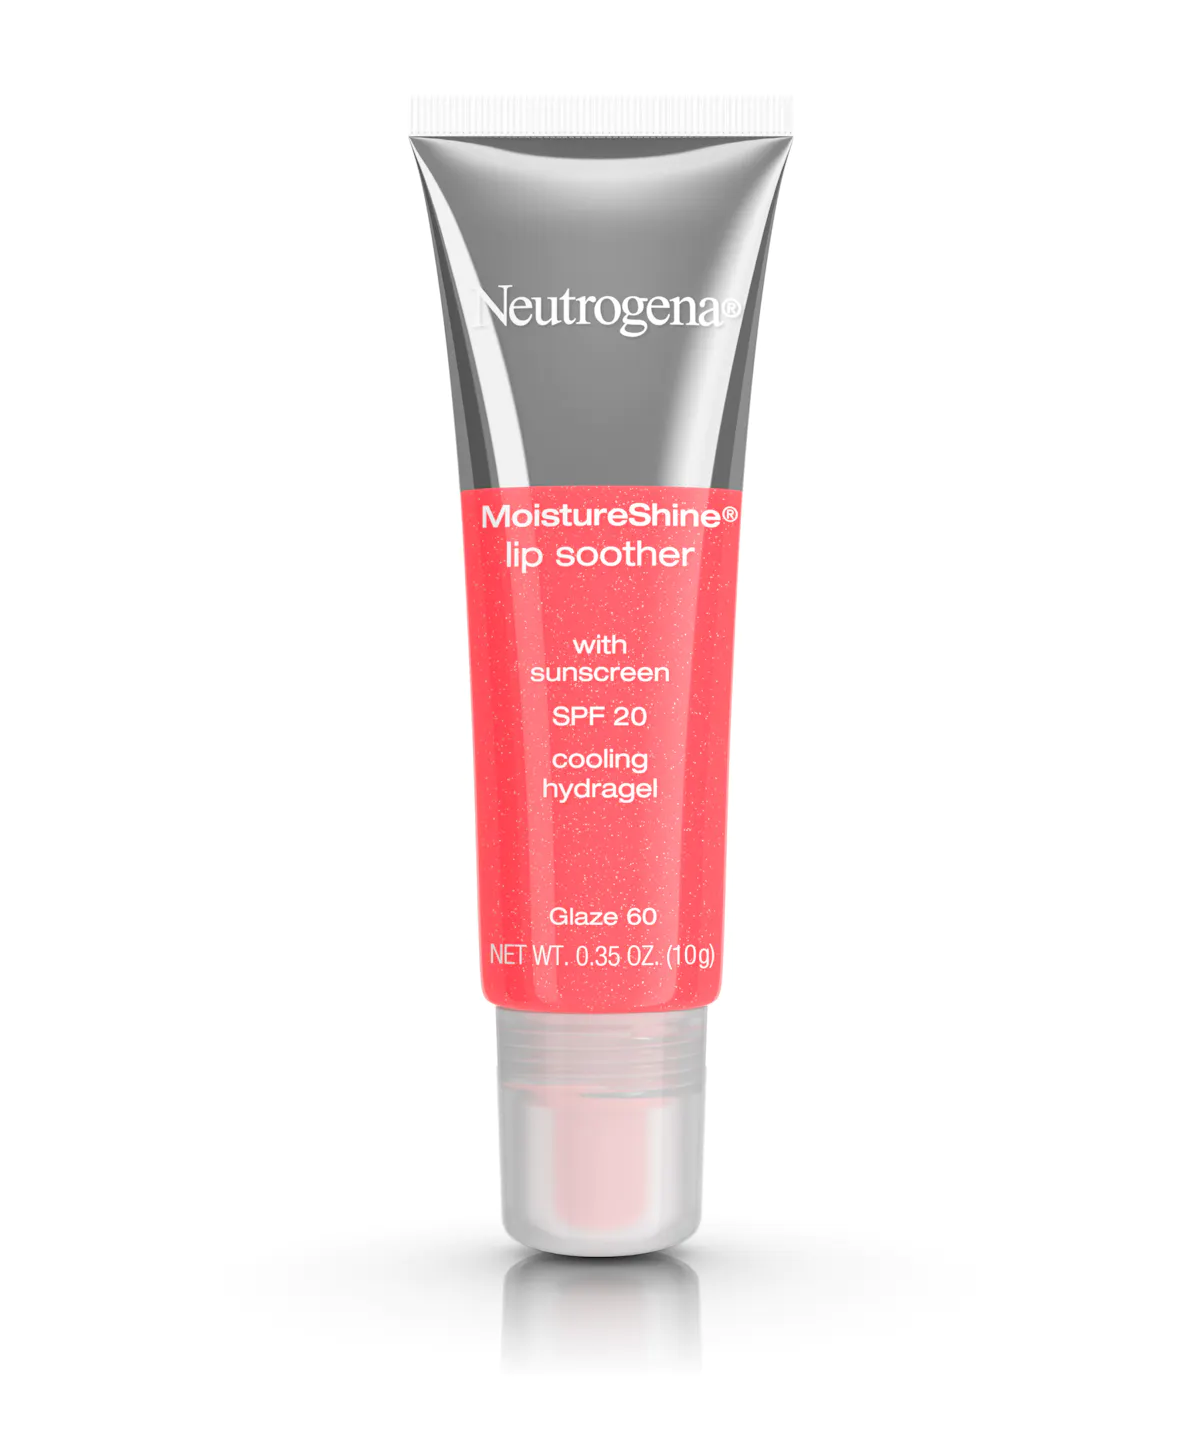 Neutrogena MoistureShine Lip Soother Gloss with SPF 20 Sun Protection, High Gloss Tinted Lip Moisturizer with Hydrating Glycerin and Soothing Cucumber for Dry Lips, Glaze 60.35 oz